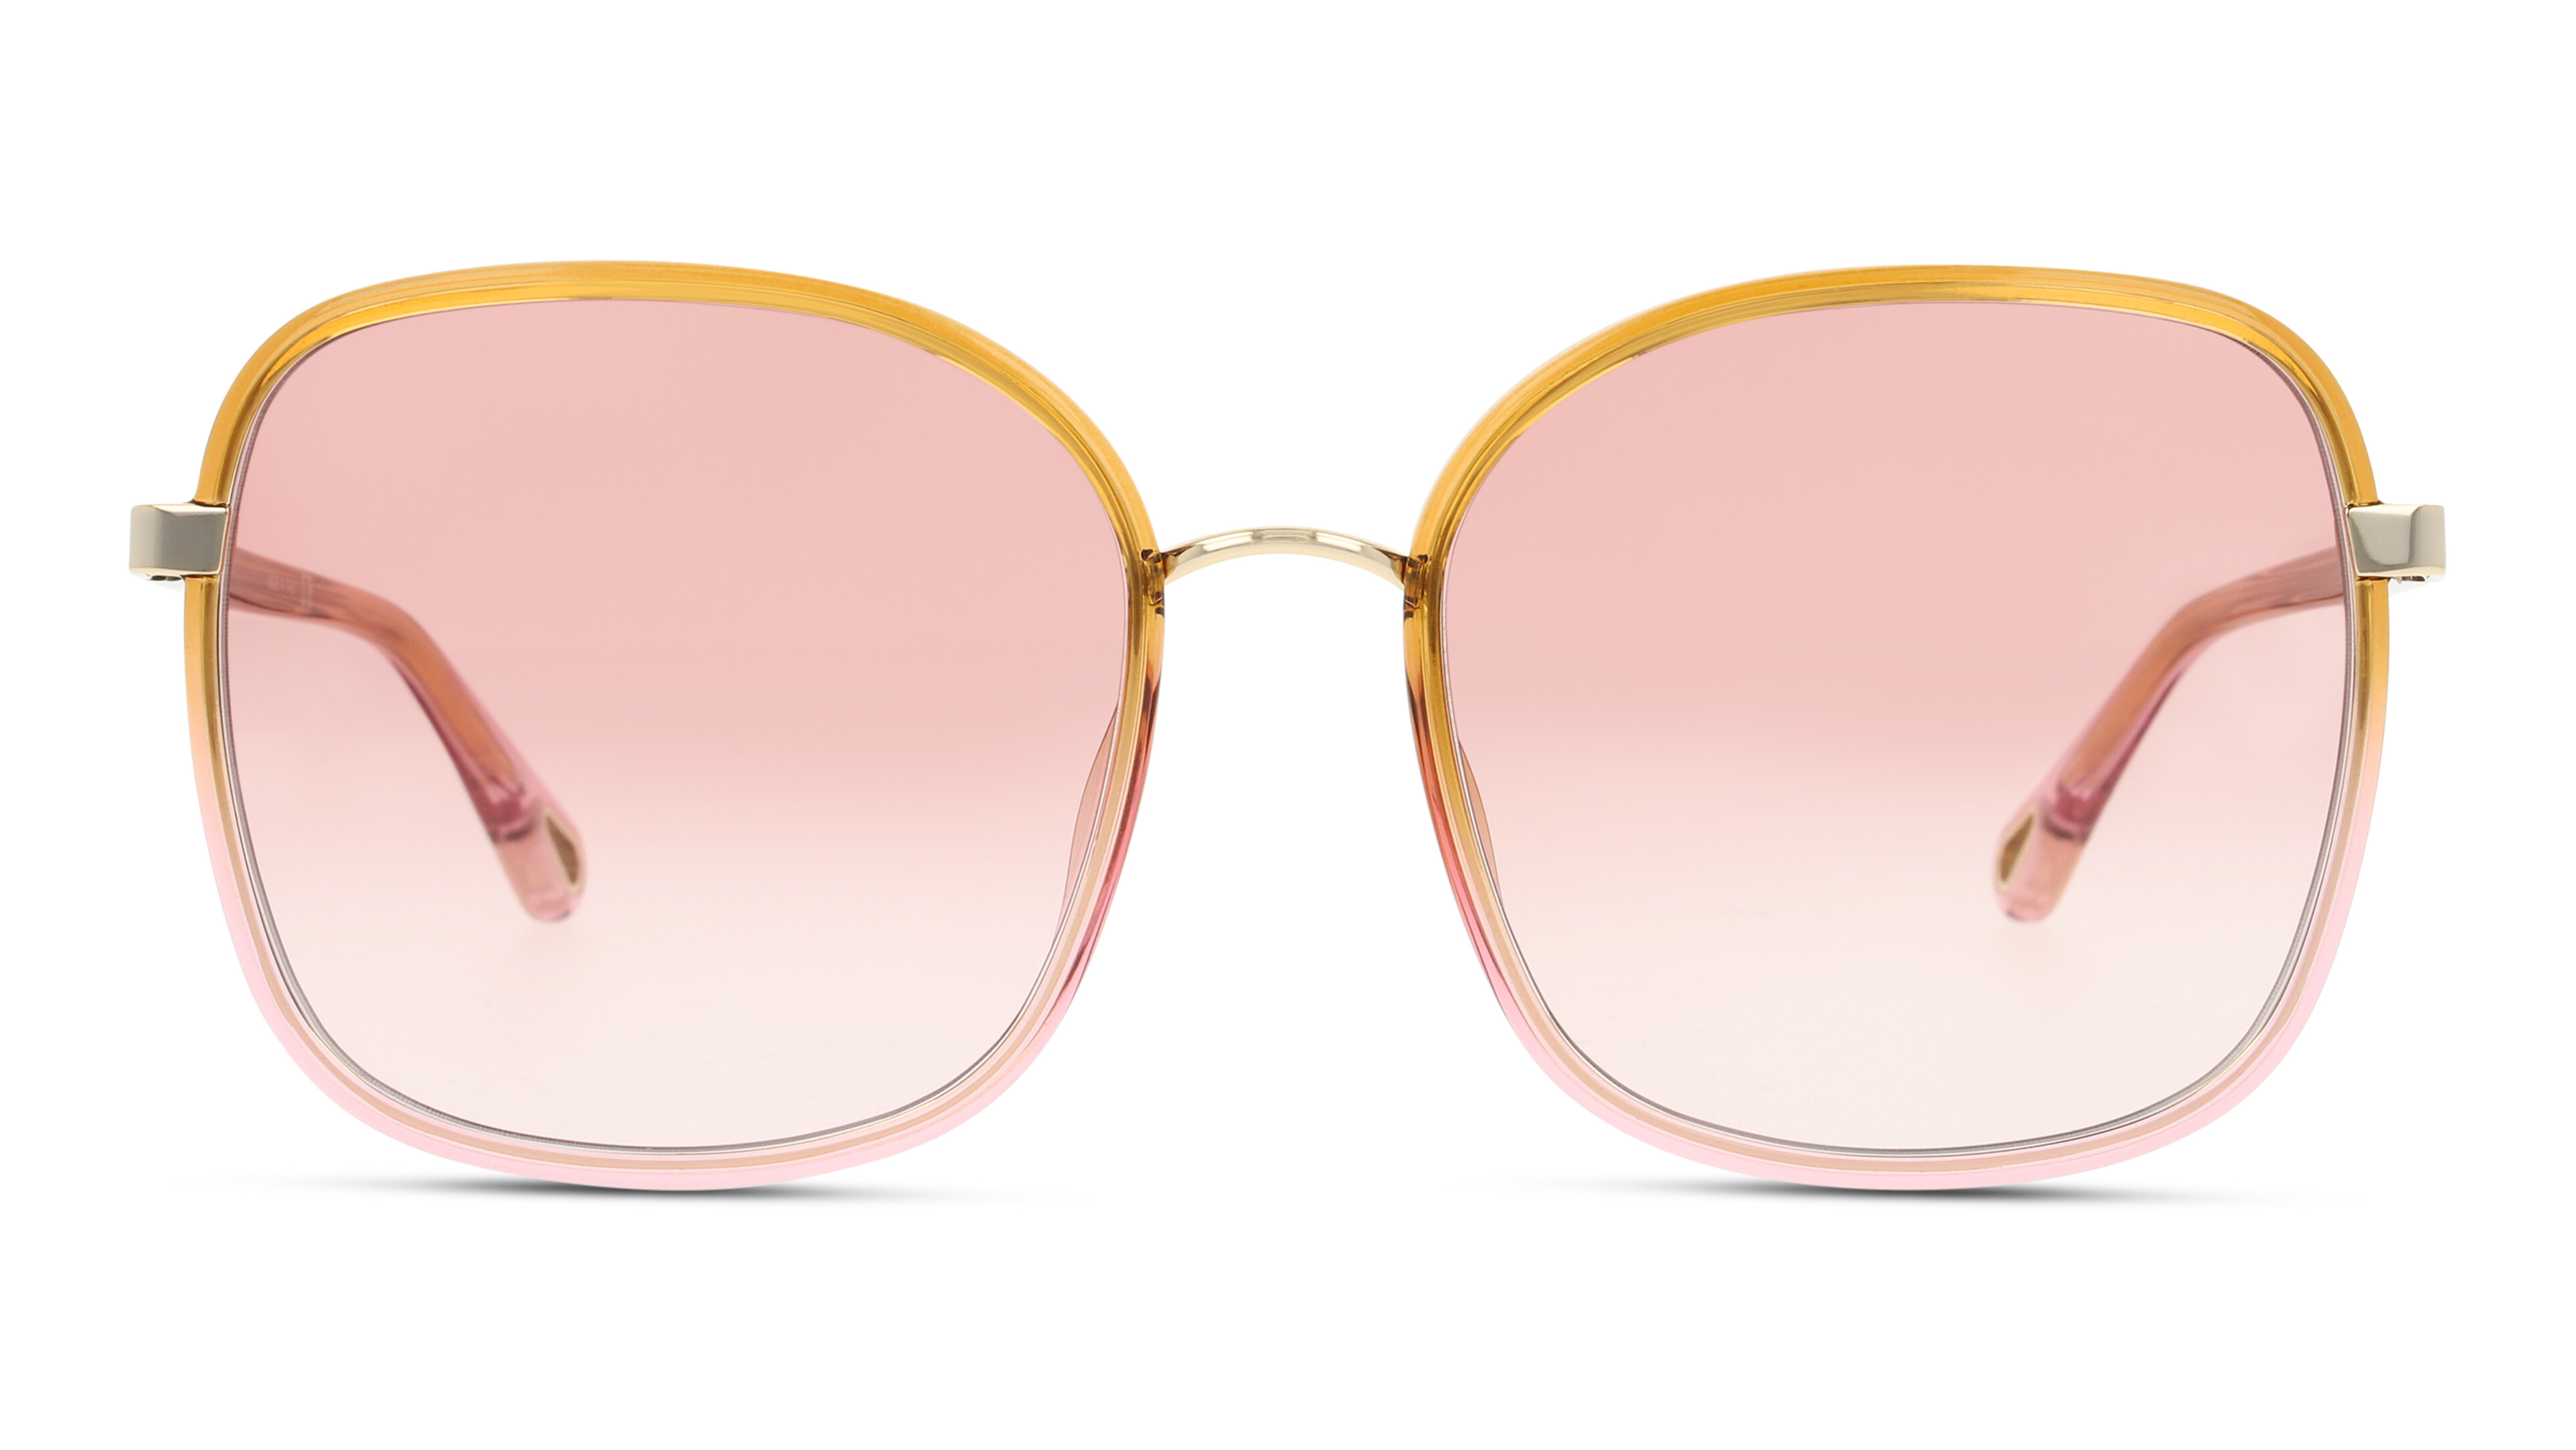 [products.image.front] Chloe CH0031S 002 Sonnenbrille